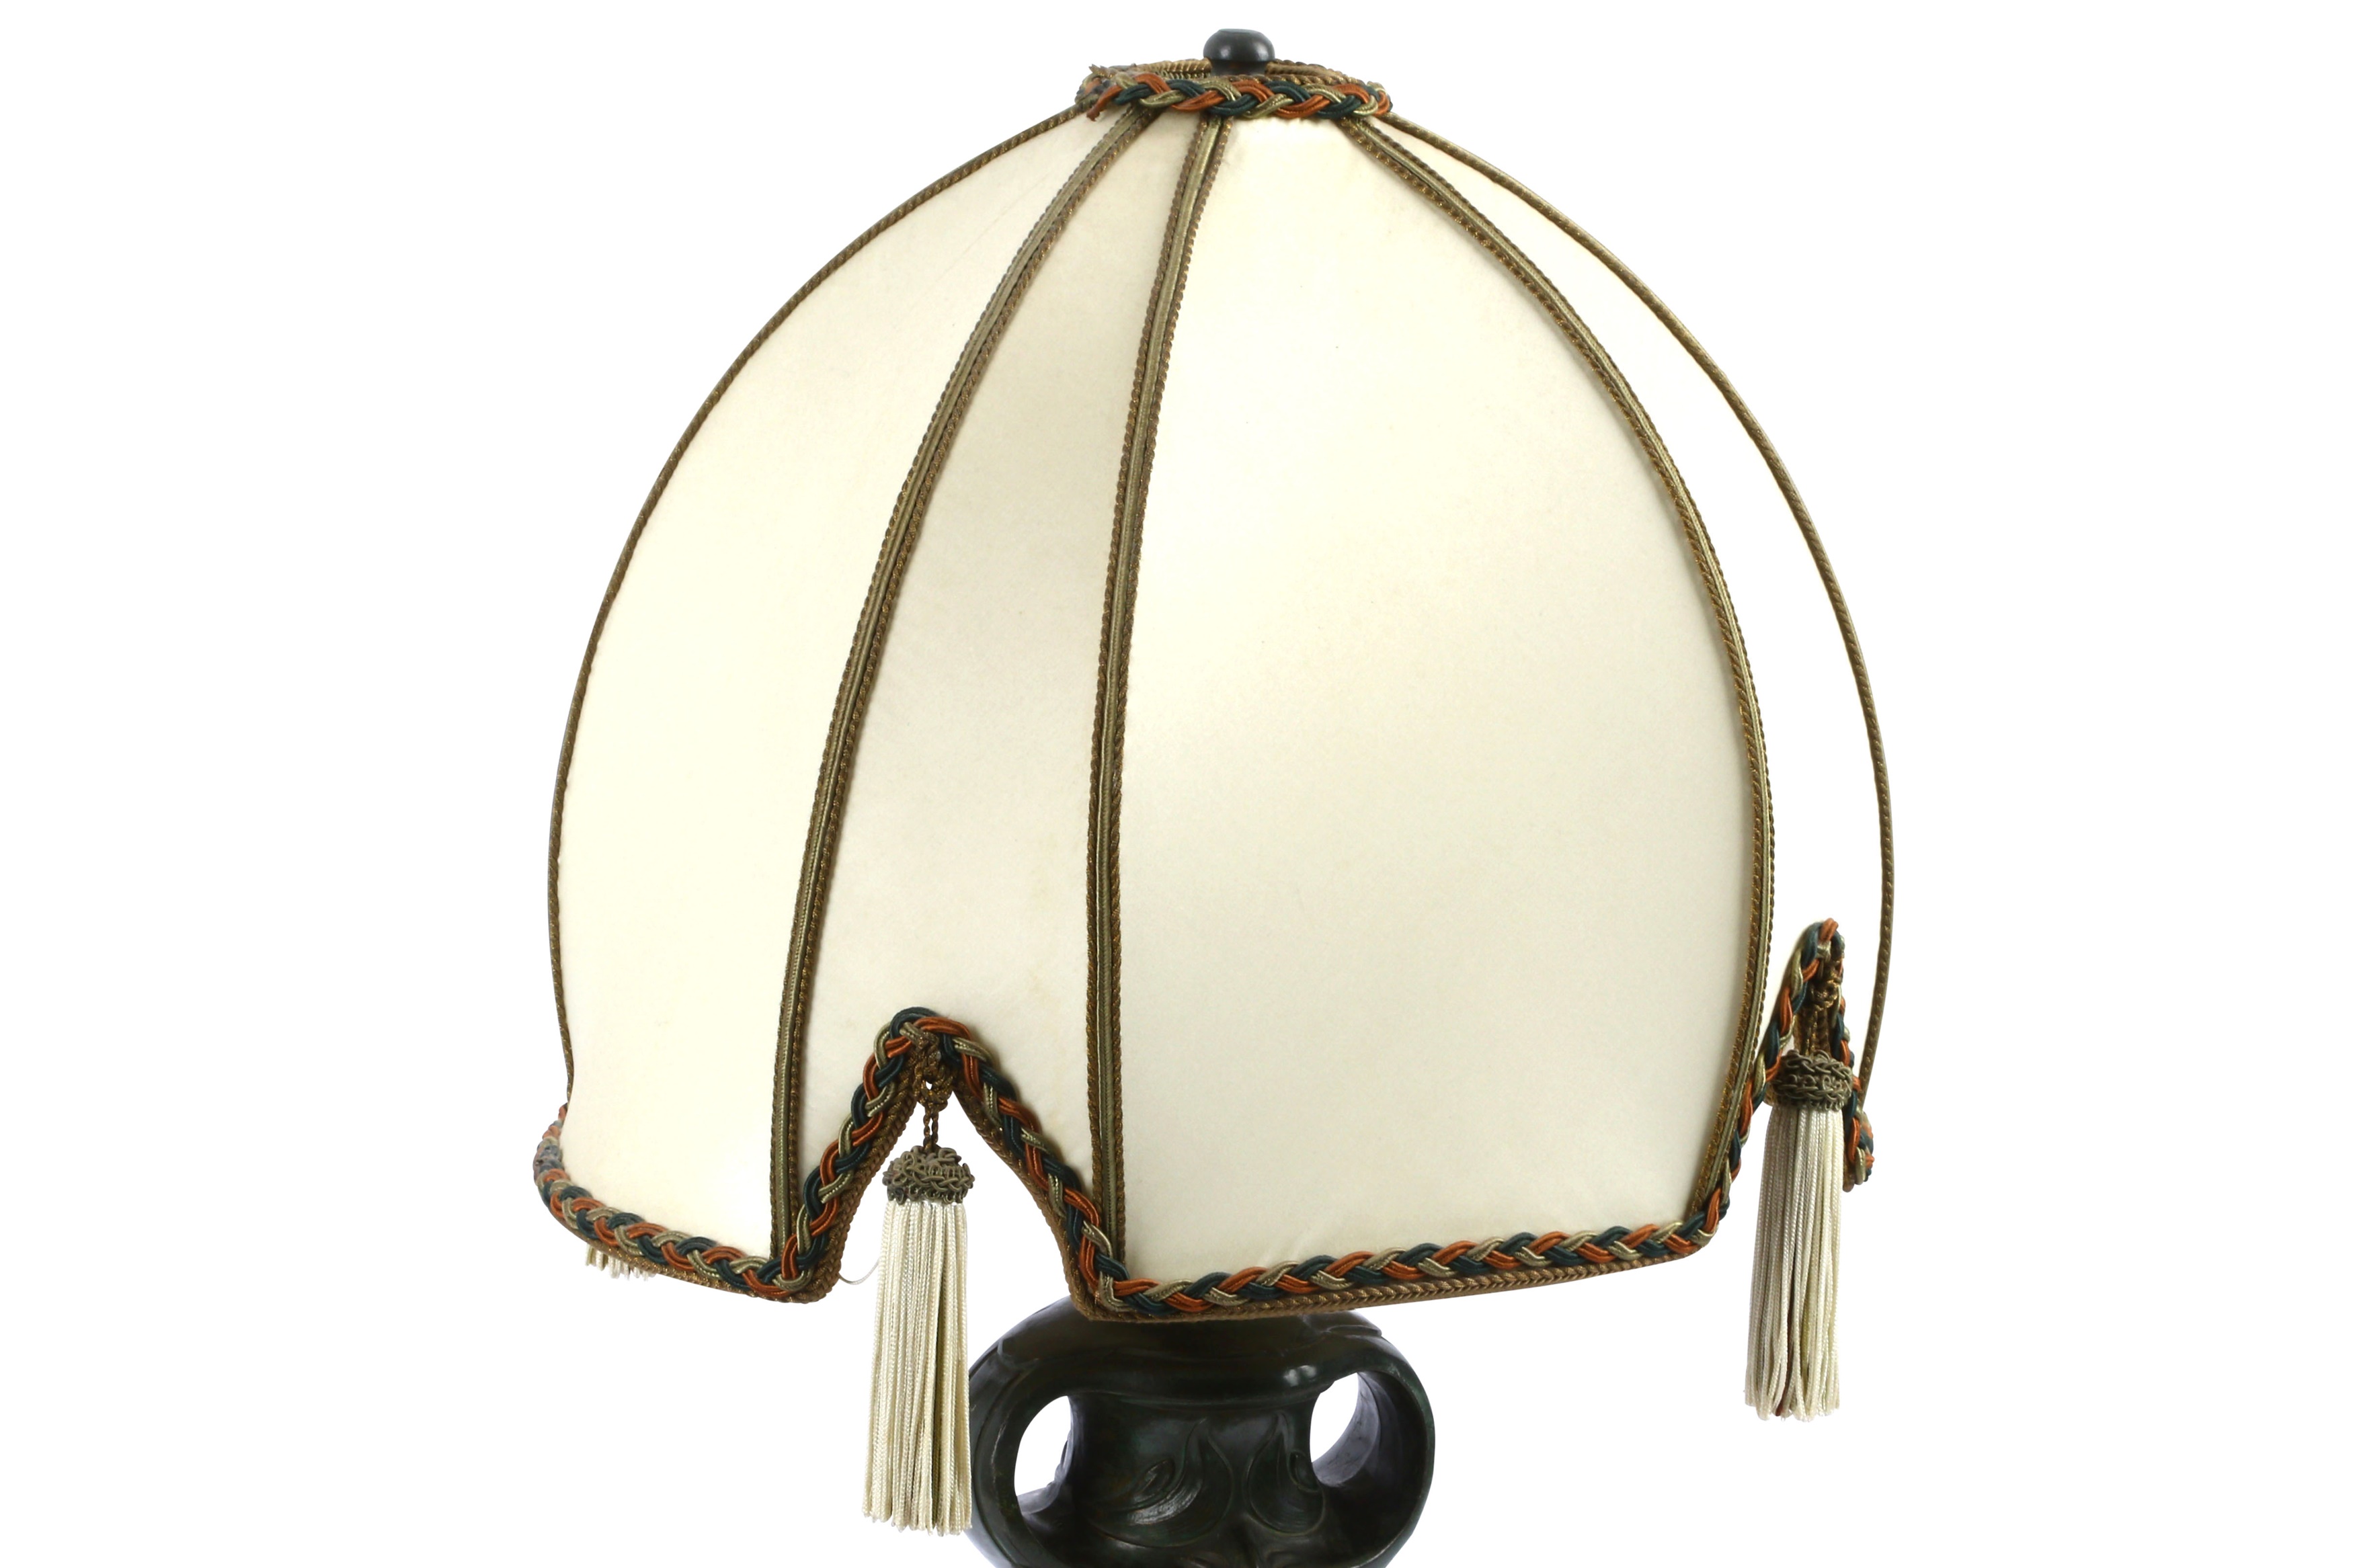 IN THE MANNER OF TIFFANY, AN ART NOUVEAU BRONZE TABLE LAMP, EARLY 20TH CENTURY, - Image 5 of 5